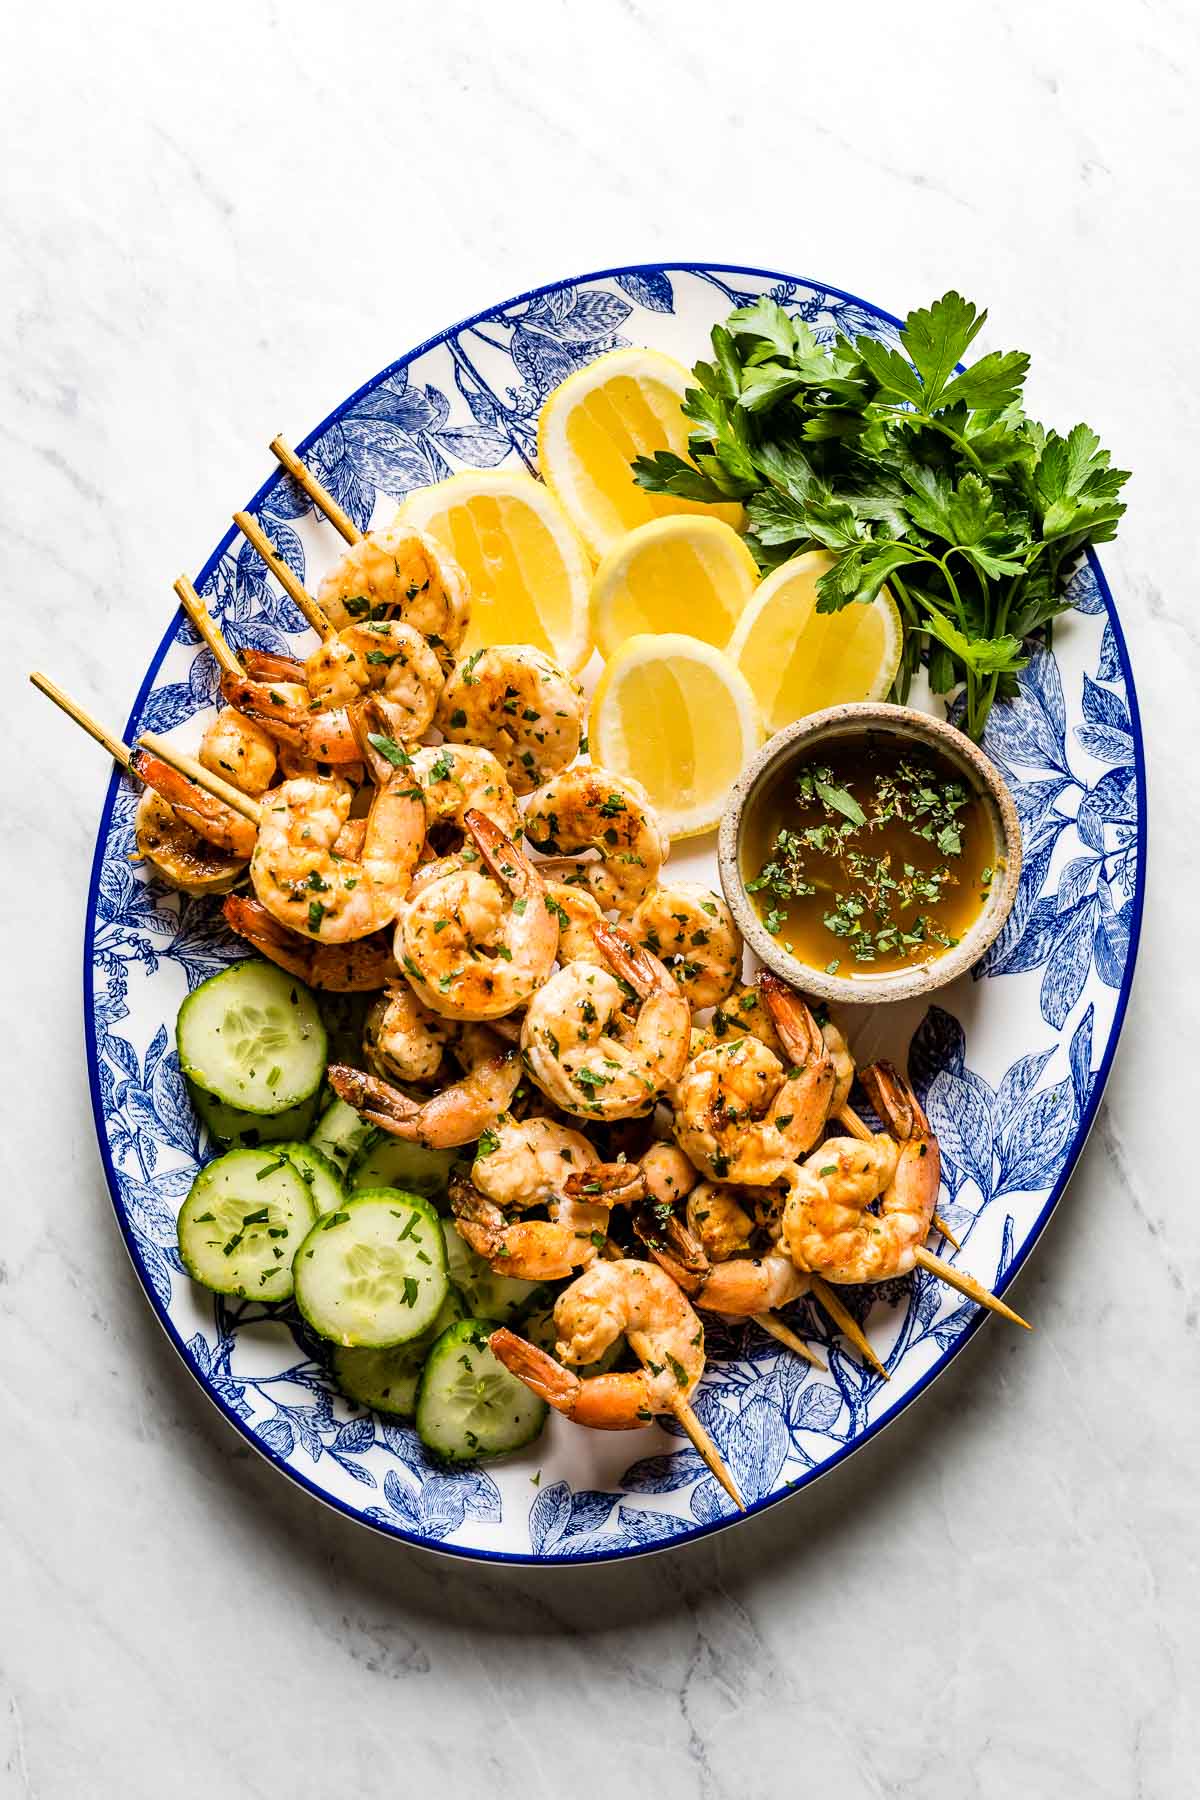 How to Grill Shrimp Skewers: Key Doneness Temp